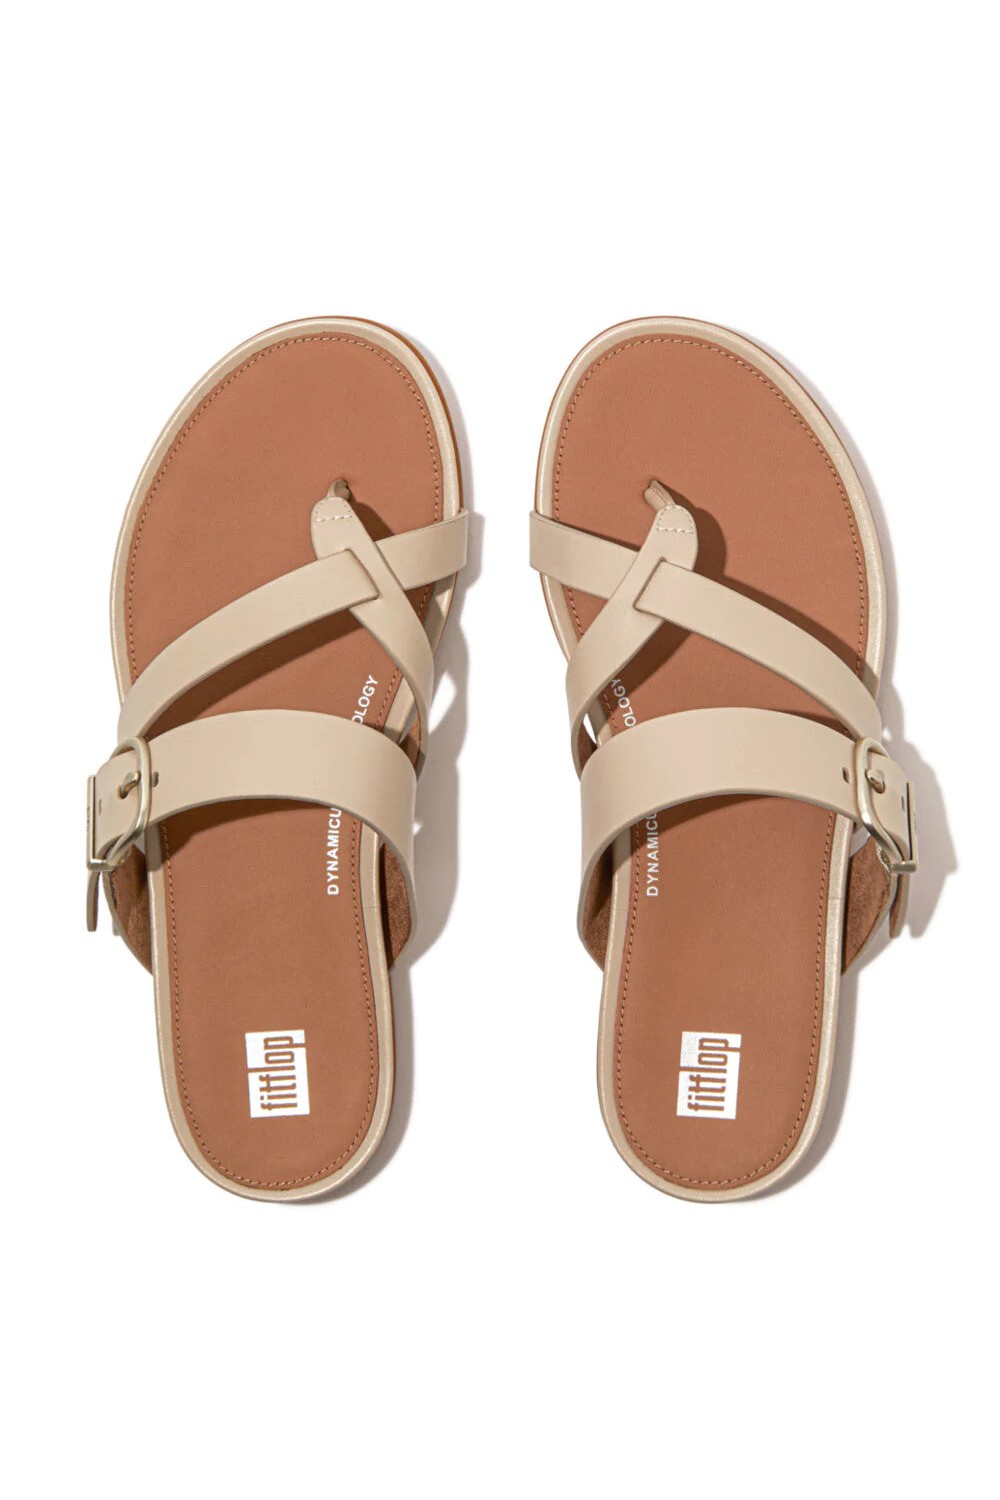 Fitflop Gracie Buckle Leather Strappy Toe-Post Sandals Stone Beige